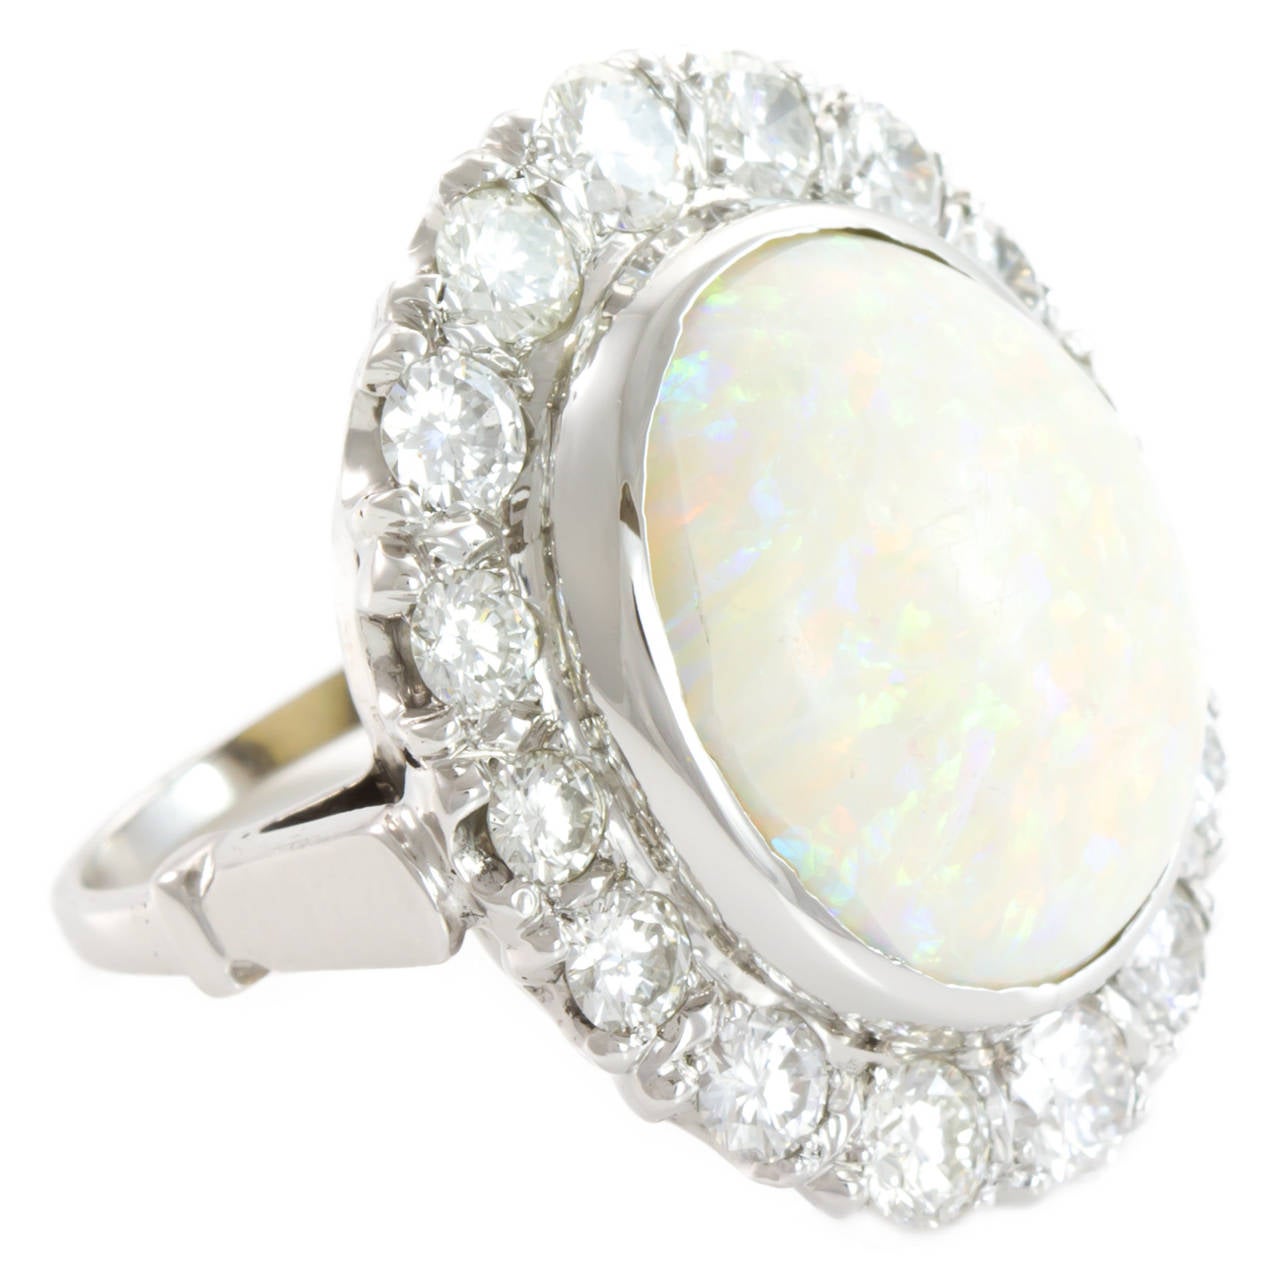 Cabochon Opal Diamond Platinum Ring In Excellent Condition For Sale In Jacksonville, FL